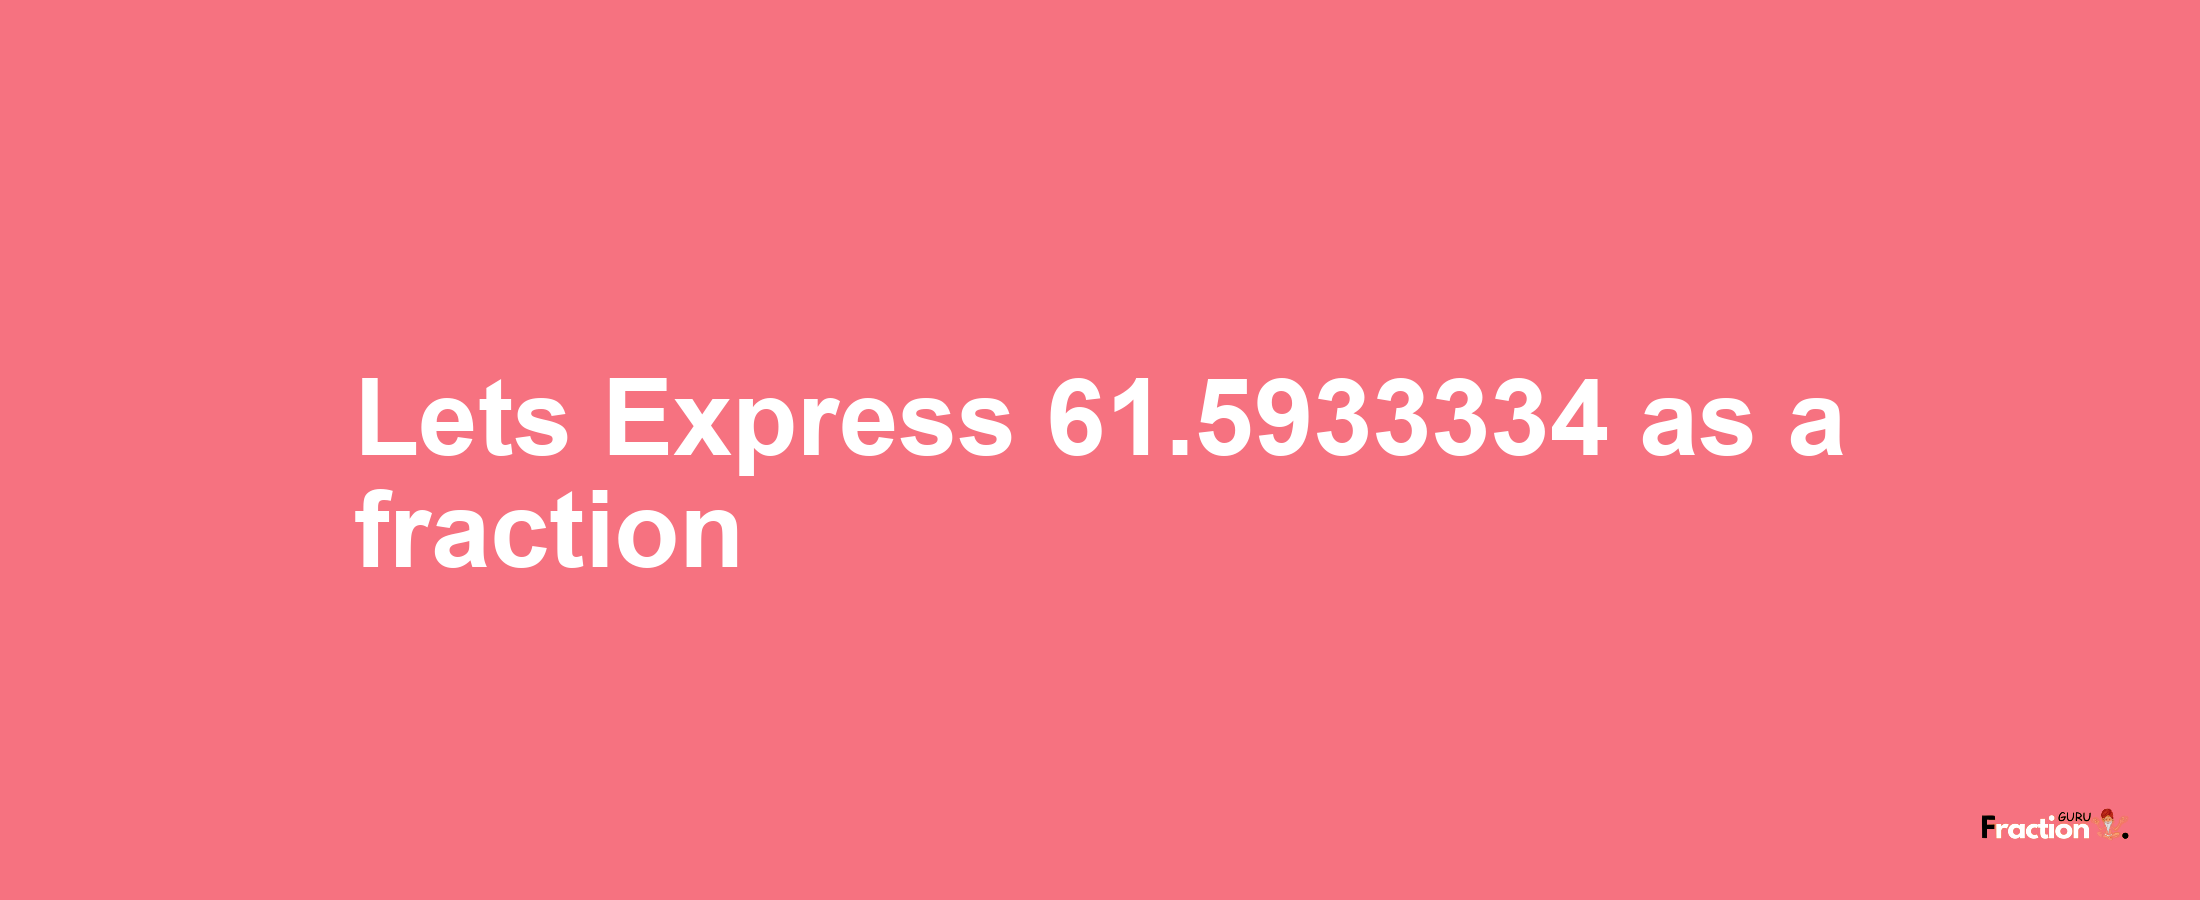 Lets Express 61.5933334 as afraction